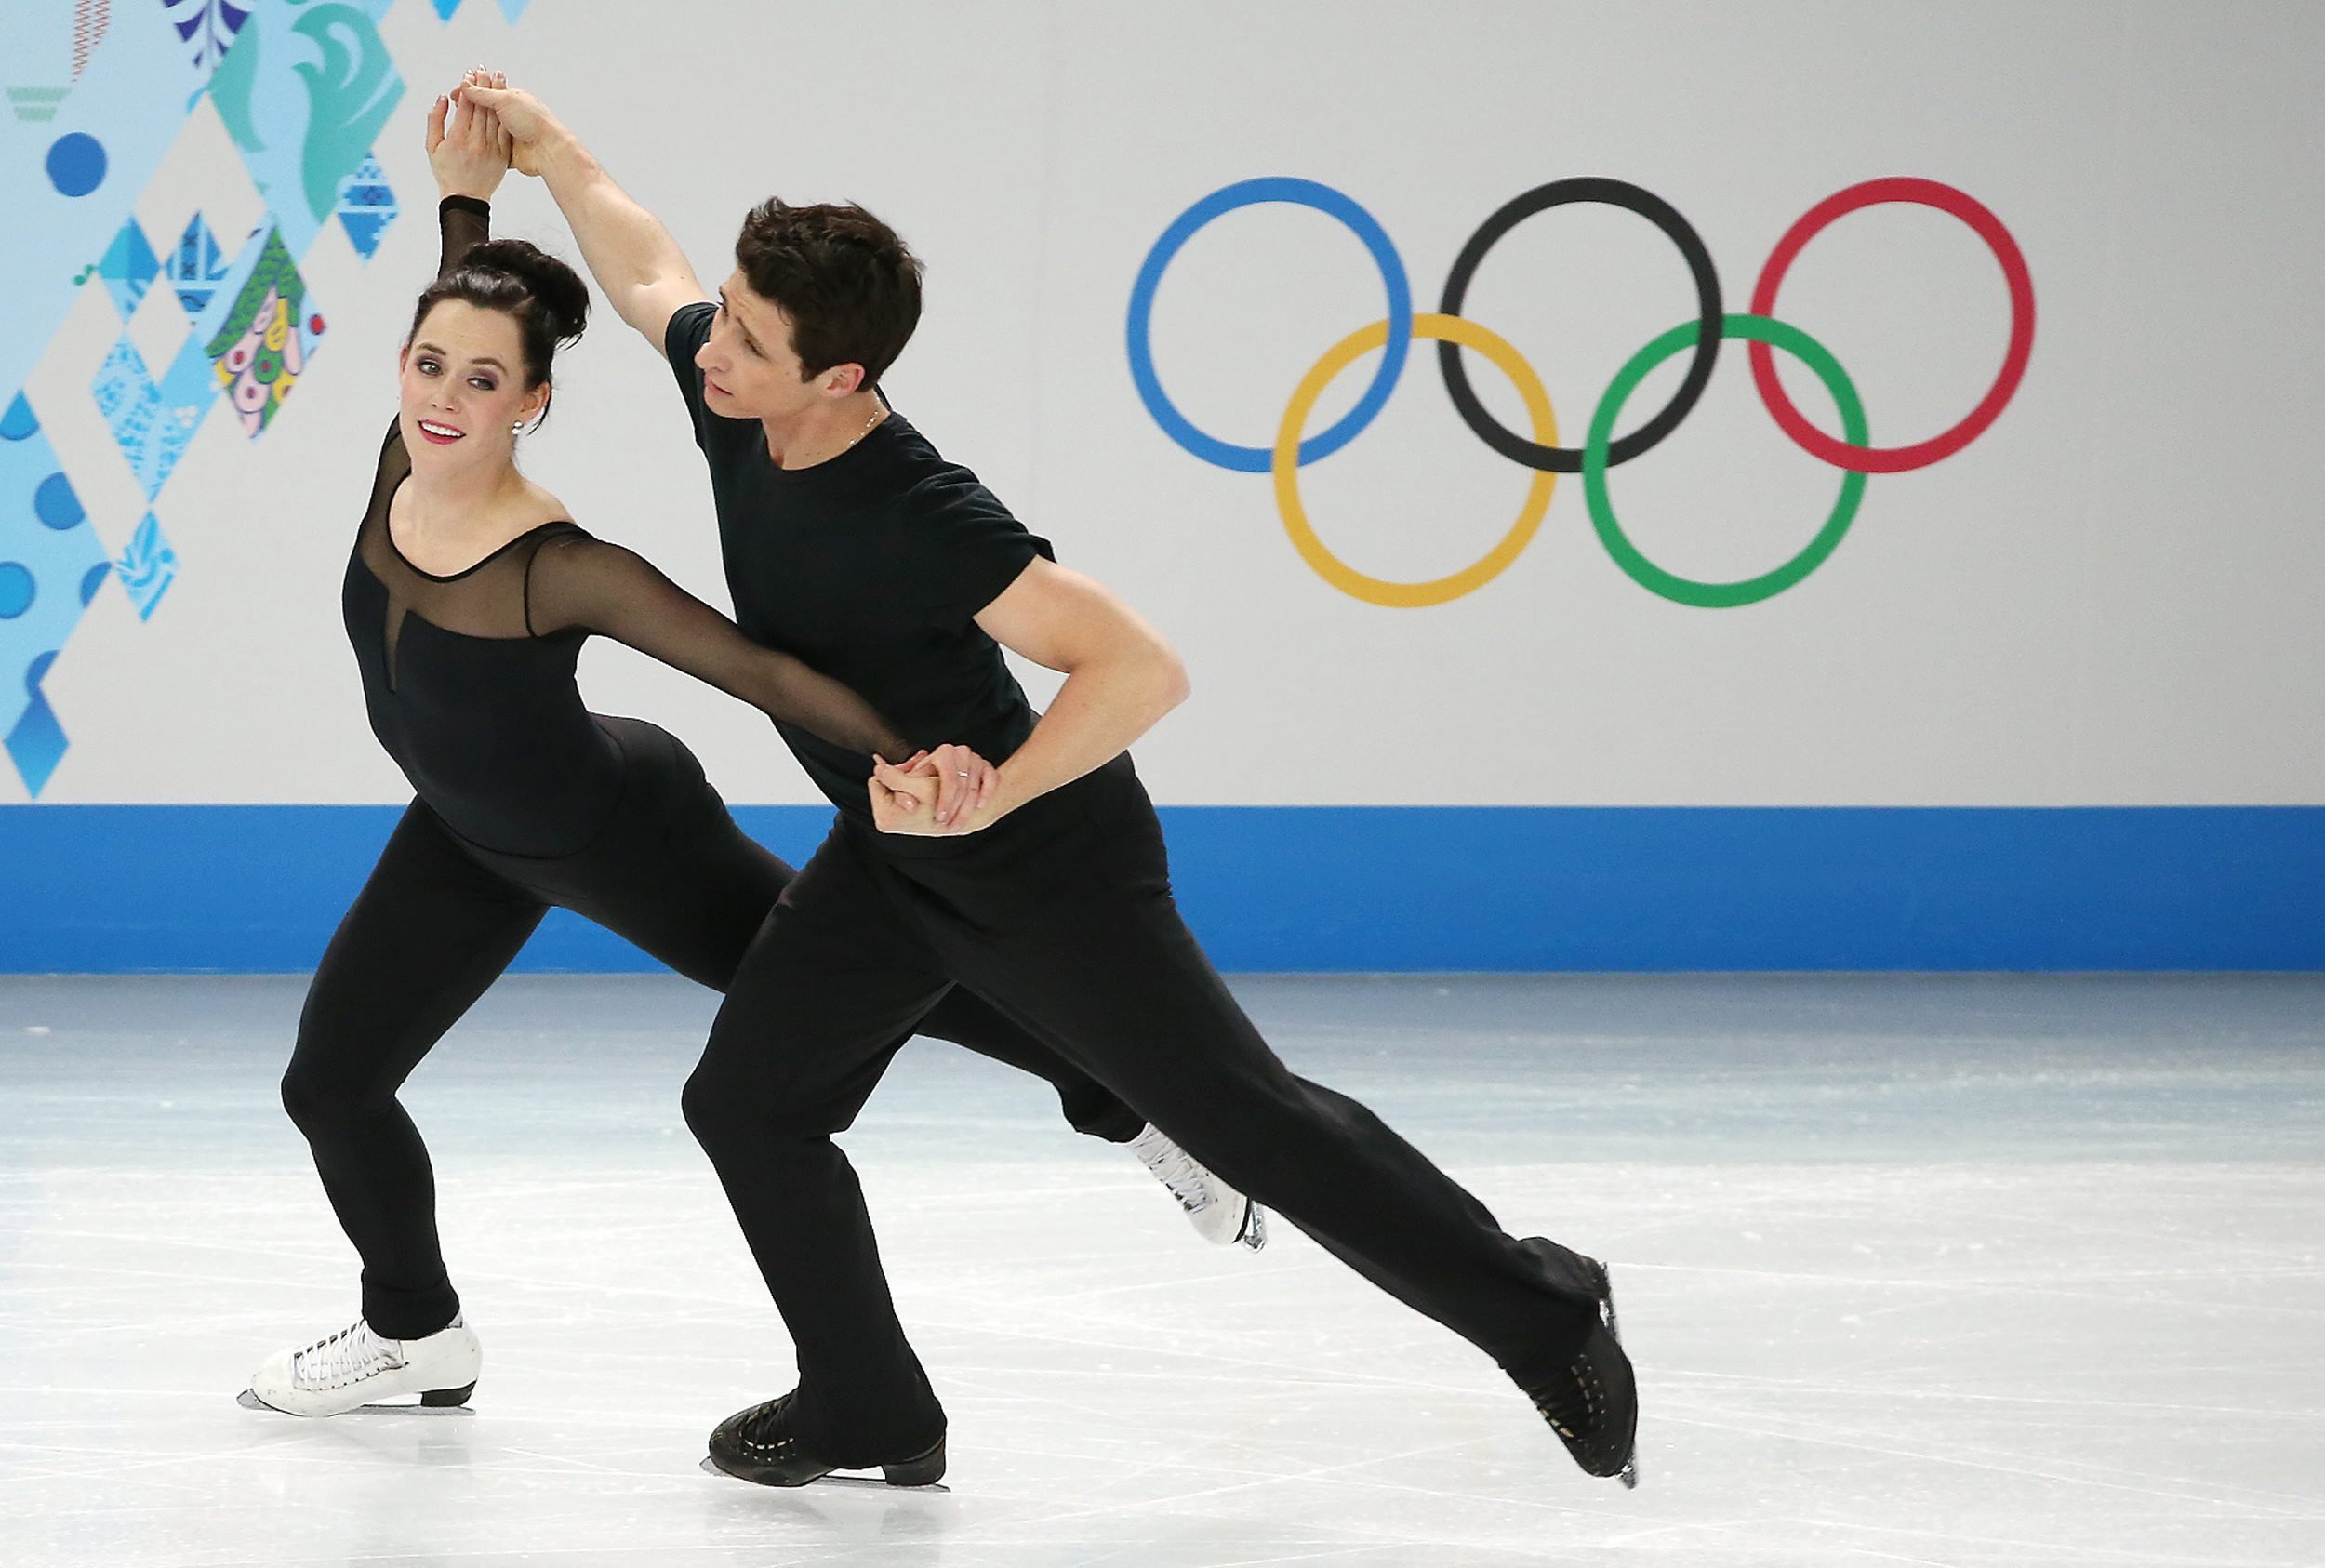 5 things to watch at the Sochi Winter Olympics on Thursday